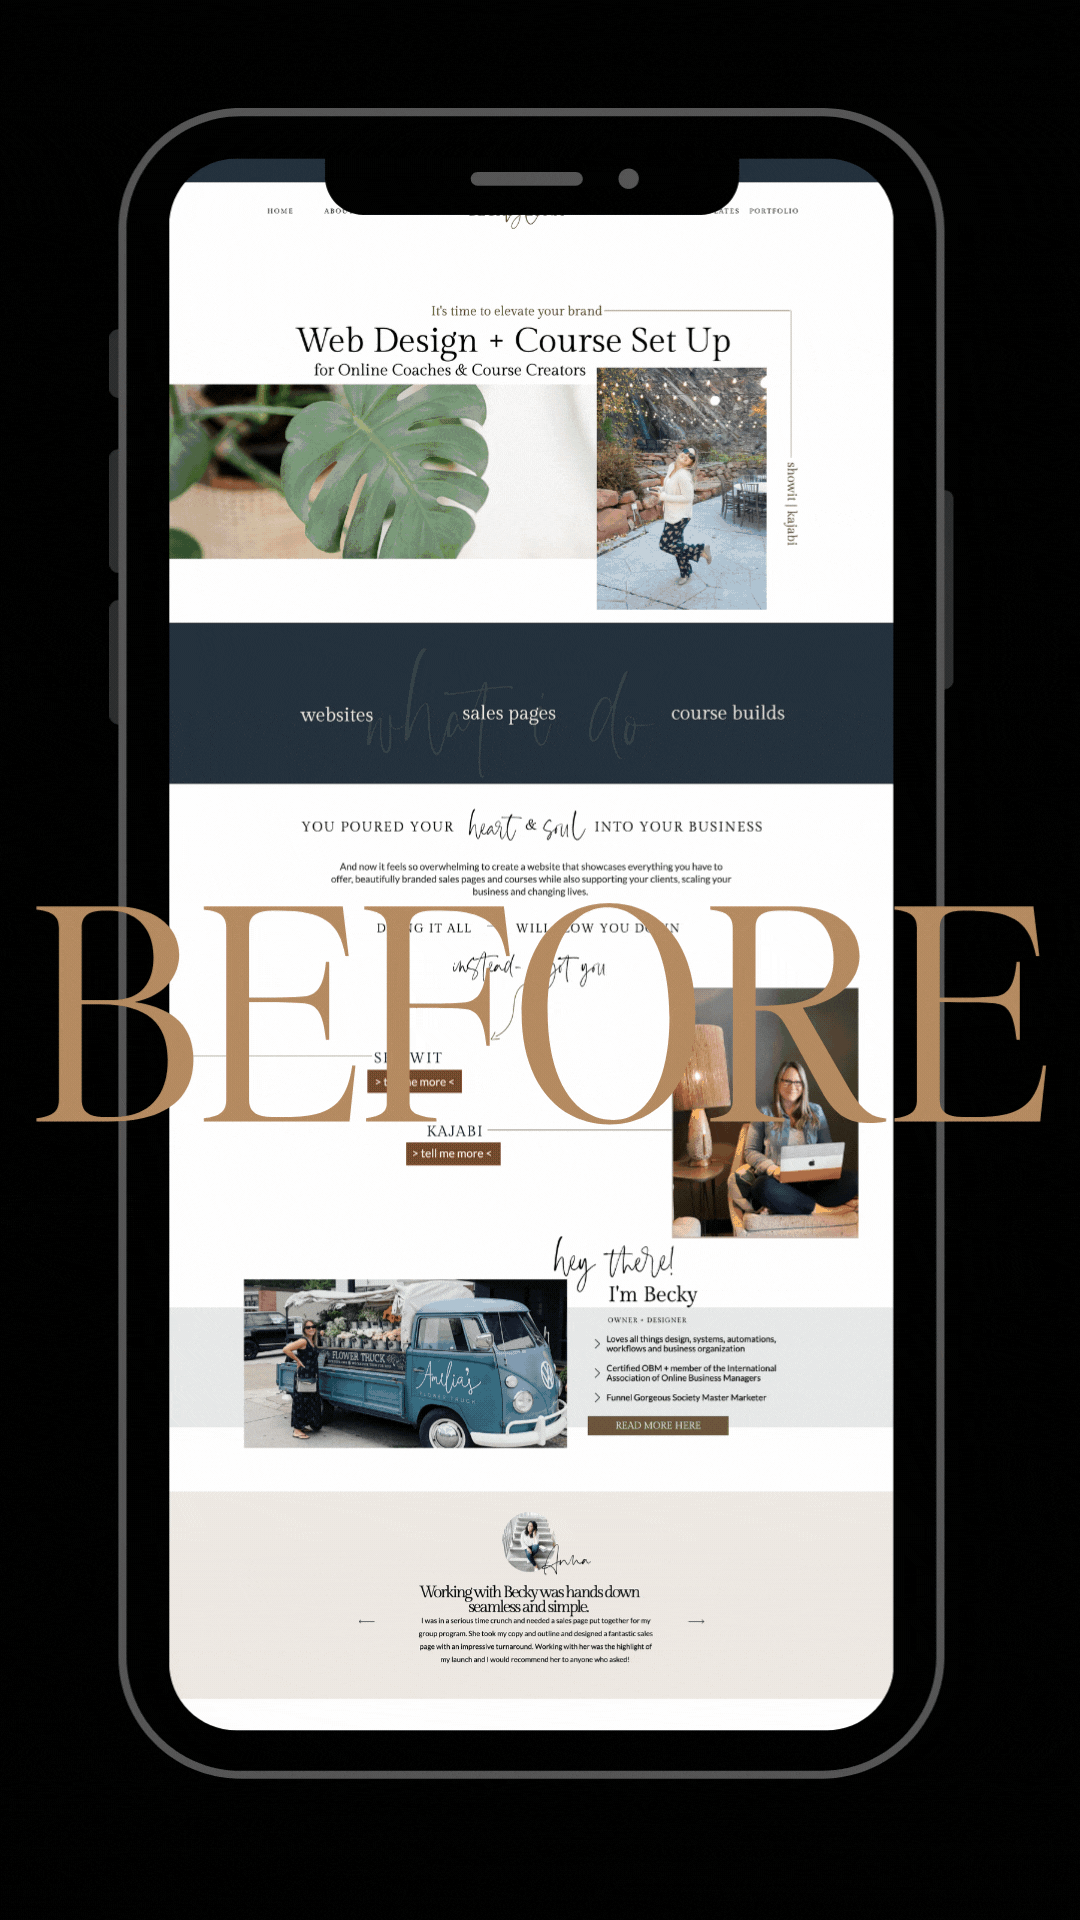 ipad with scrolling website images of before and after astrobranding designed by becky luna designs